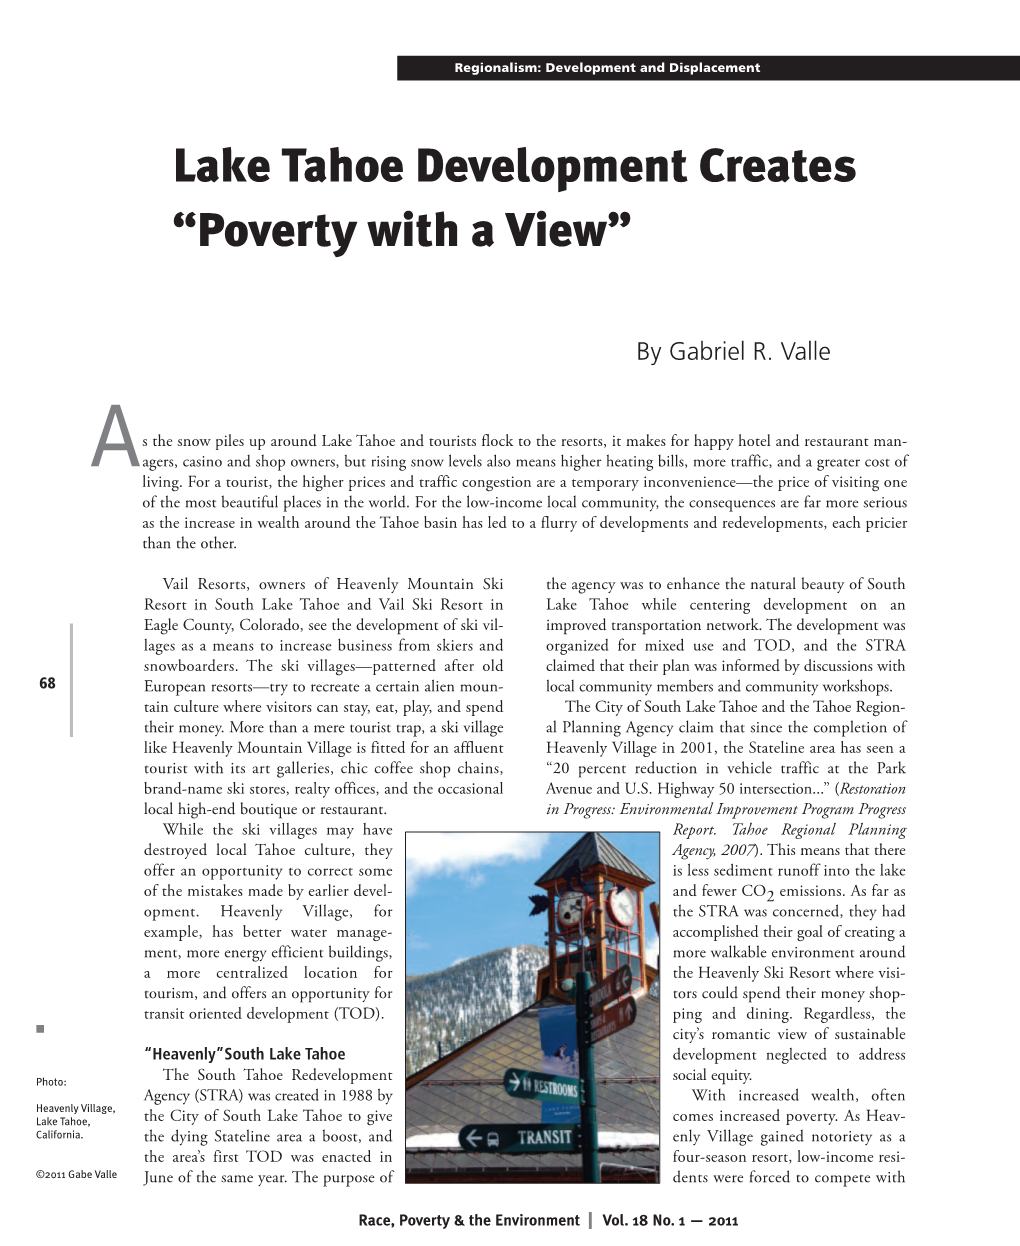 Lake Tahoe Development Creates “Poverty with a View”